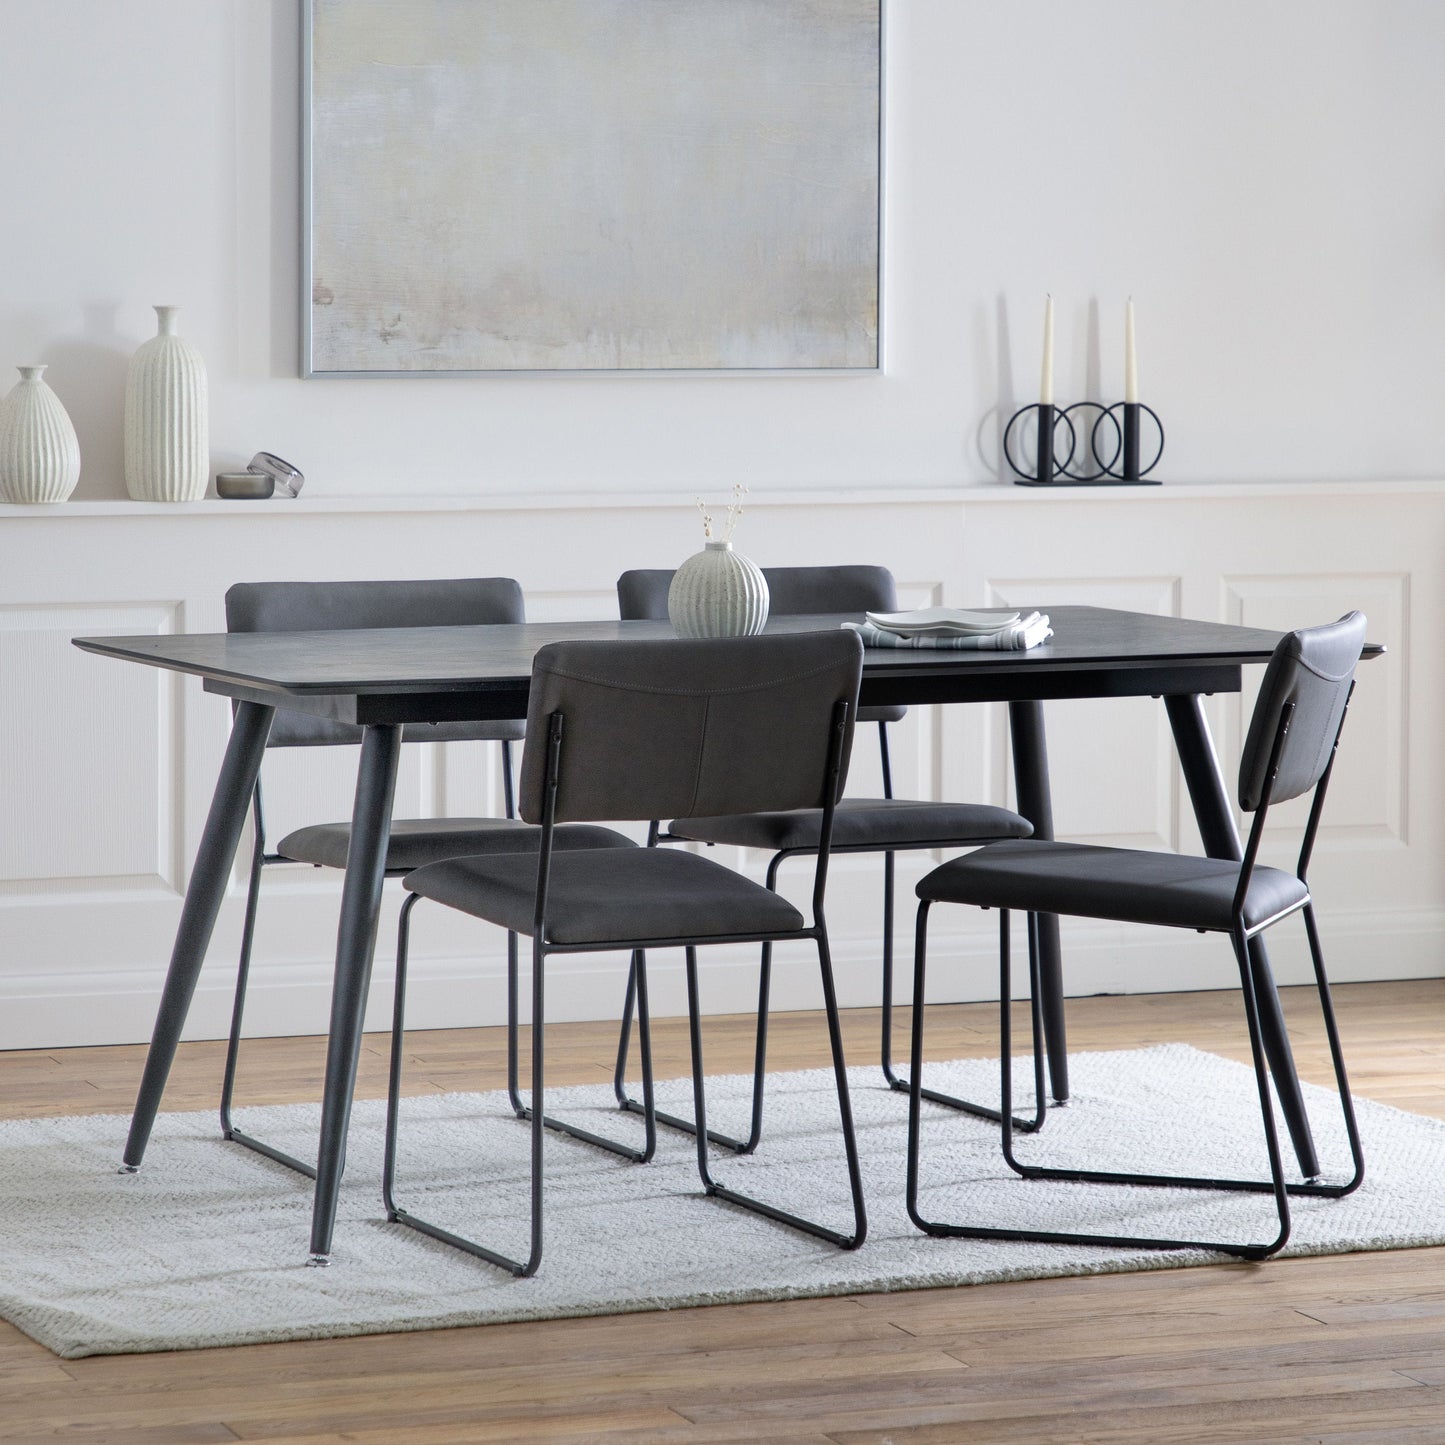 Astley Dining Table - Colour Options